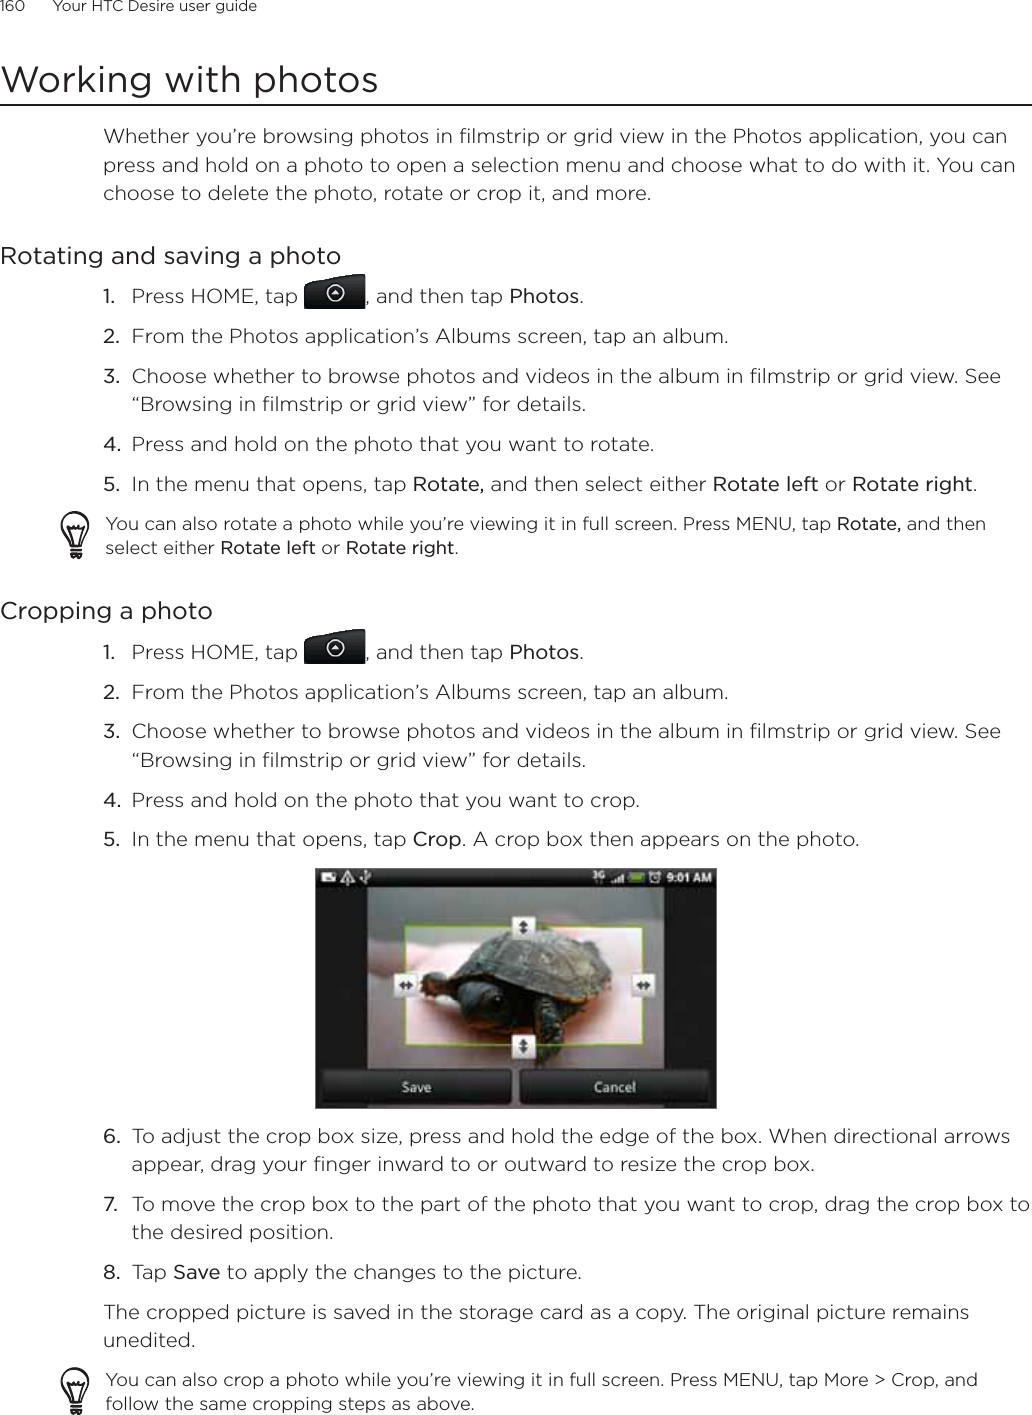 160      Your HTC Desire user guide      Working with photosWhether you’re browsing photos in filmstrip or grid view in the Photos application, you can press and hold on a photo to open a selection menu and choose what to do with it. You can choose to delete the photo, rotate or crop it, and more.Rotating and saving a photoPress HOME, tap  , and then tap Photos.From the Photos application’s Albums screen, tap an album.Choose whether to browse photos and videos in the album in filmstrip or grid view. See “Browsing in filmstrip or grid view” for details.Press and hold on the photo that you want to rotate.In the menu that opens, tap Rotate, and then select either Rotate left or Rotate right.You can also rotate a photo while you’re viewing it in full screen. Press MENU, tap Rotate, and then select either Rotate left or Rotate right.Cropping a photo1. Press HOME, tap  , and then tap Photos.2. From the Photos application’s Albums screen, tap an album.3. Choose whether to browse photos and videos in the album in filmstrip or grid view. See “Browsing in filmstrip or grid view” for details.4. Press and hold on the photo that you want to crop.5. In the menu that opens, tap Crop. A crop box then appears on the photo.6. To adjust the crop box size, press and hold the edge of the box. When directional arrows appear, drag your finger inward to or outward to resize the crop box.7. To move the crop box to the part of the photo that you want to crop, drag the crop box to the desired position.8. Tap Save to apply the changes to the picture.The cropped picture is saved in the storage card as a copy. The original picture remains unedited.You can also crop a photo while you’re viewing it in full screen. Press MENU, tap More &gt; Crop, and follow the same cropping steps as above.1.2.3.4.5.